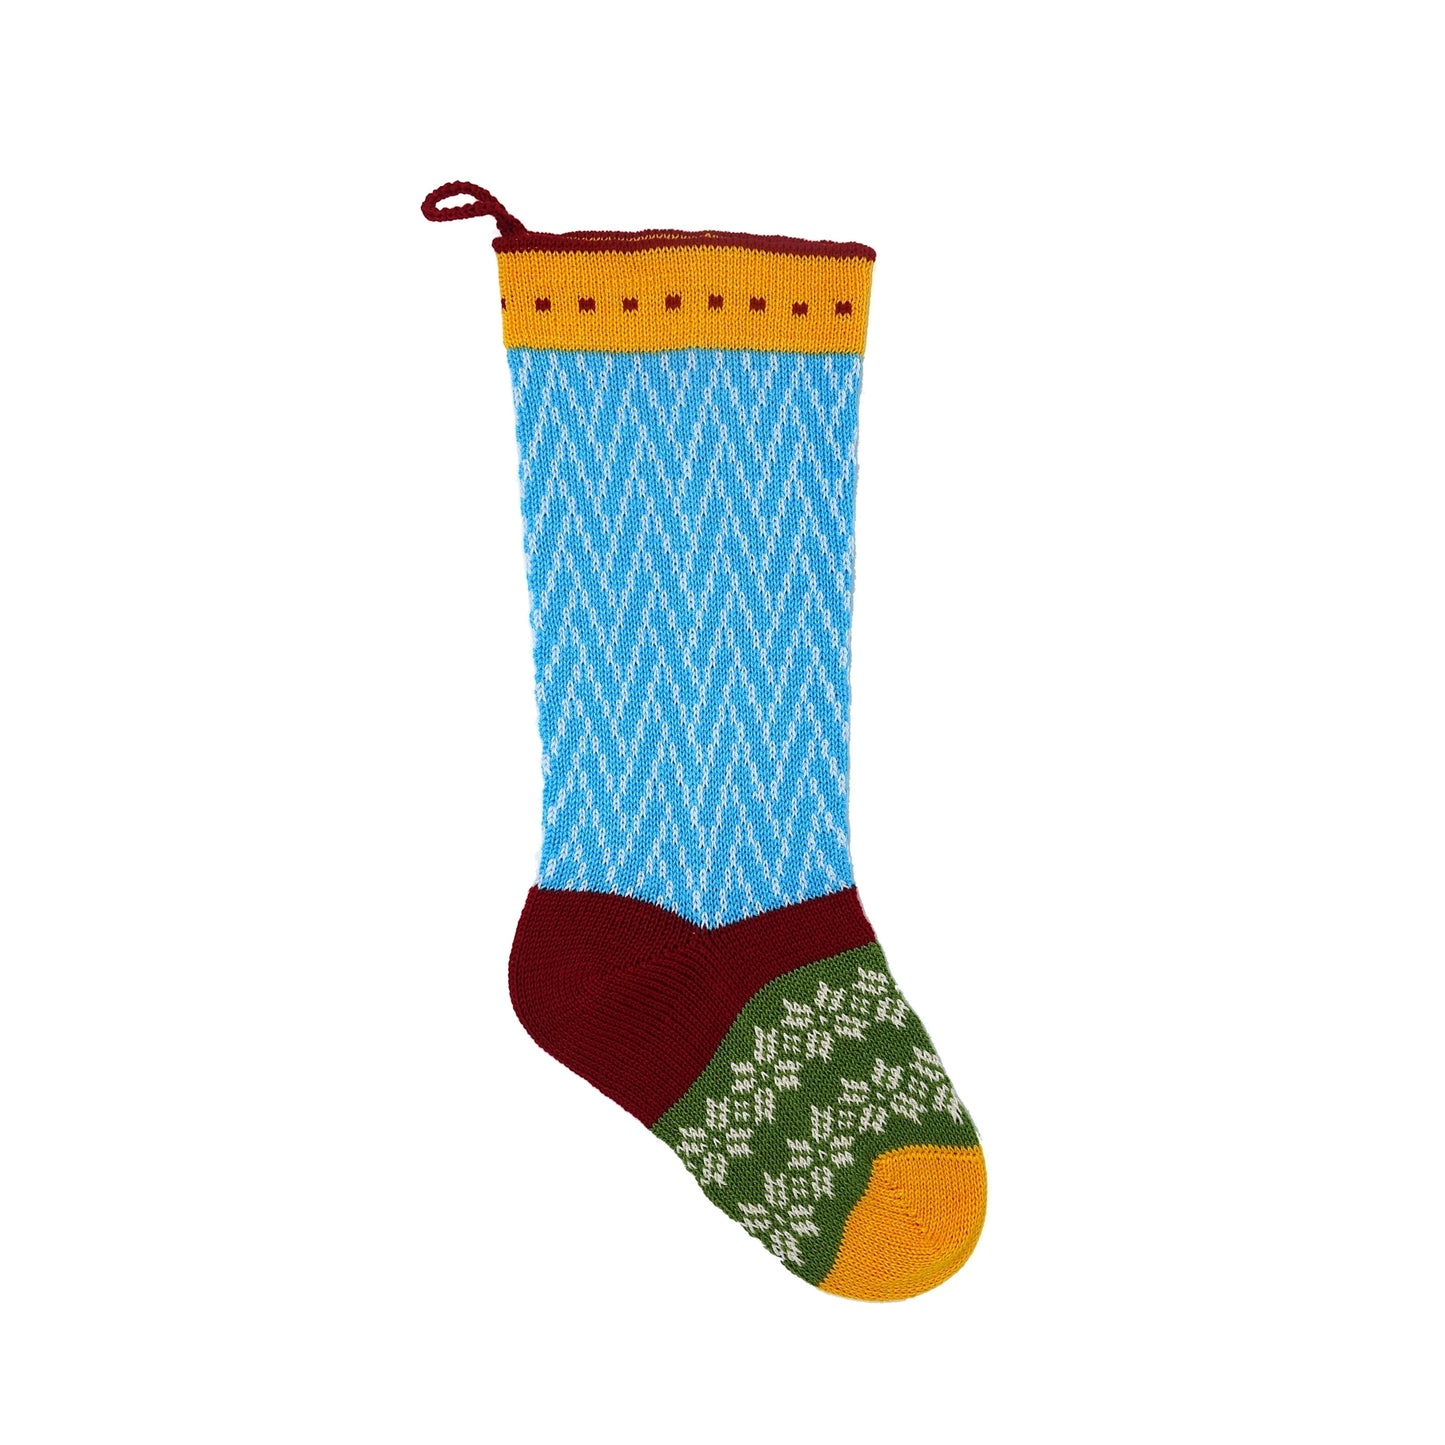 Colorful Knit Stockings